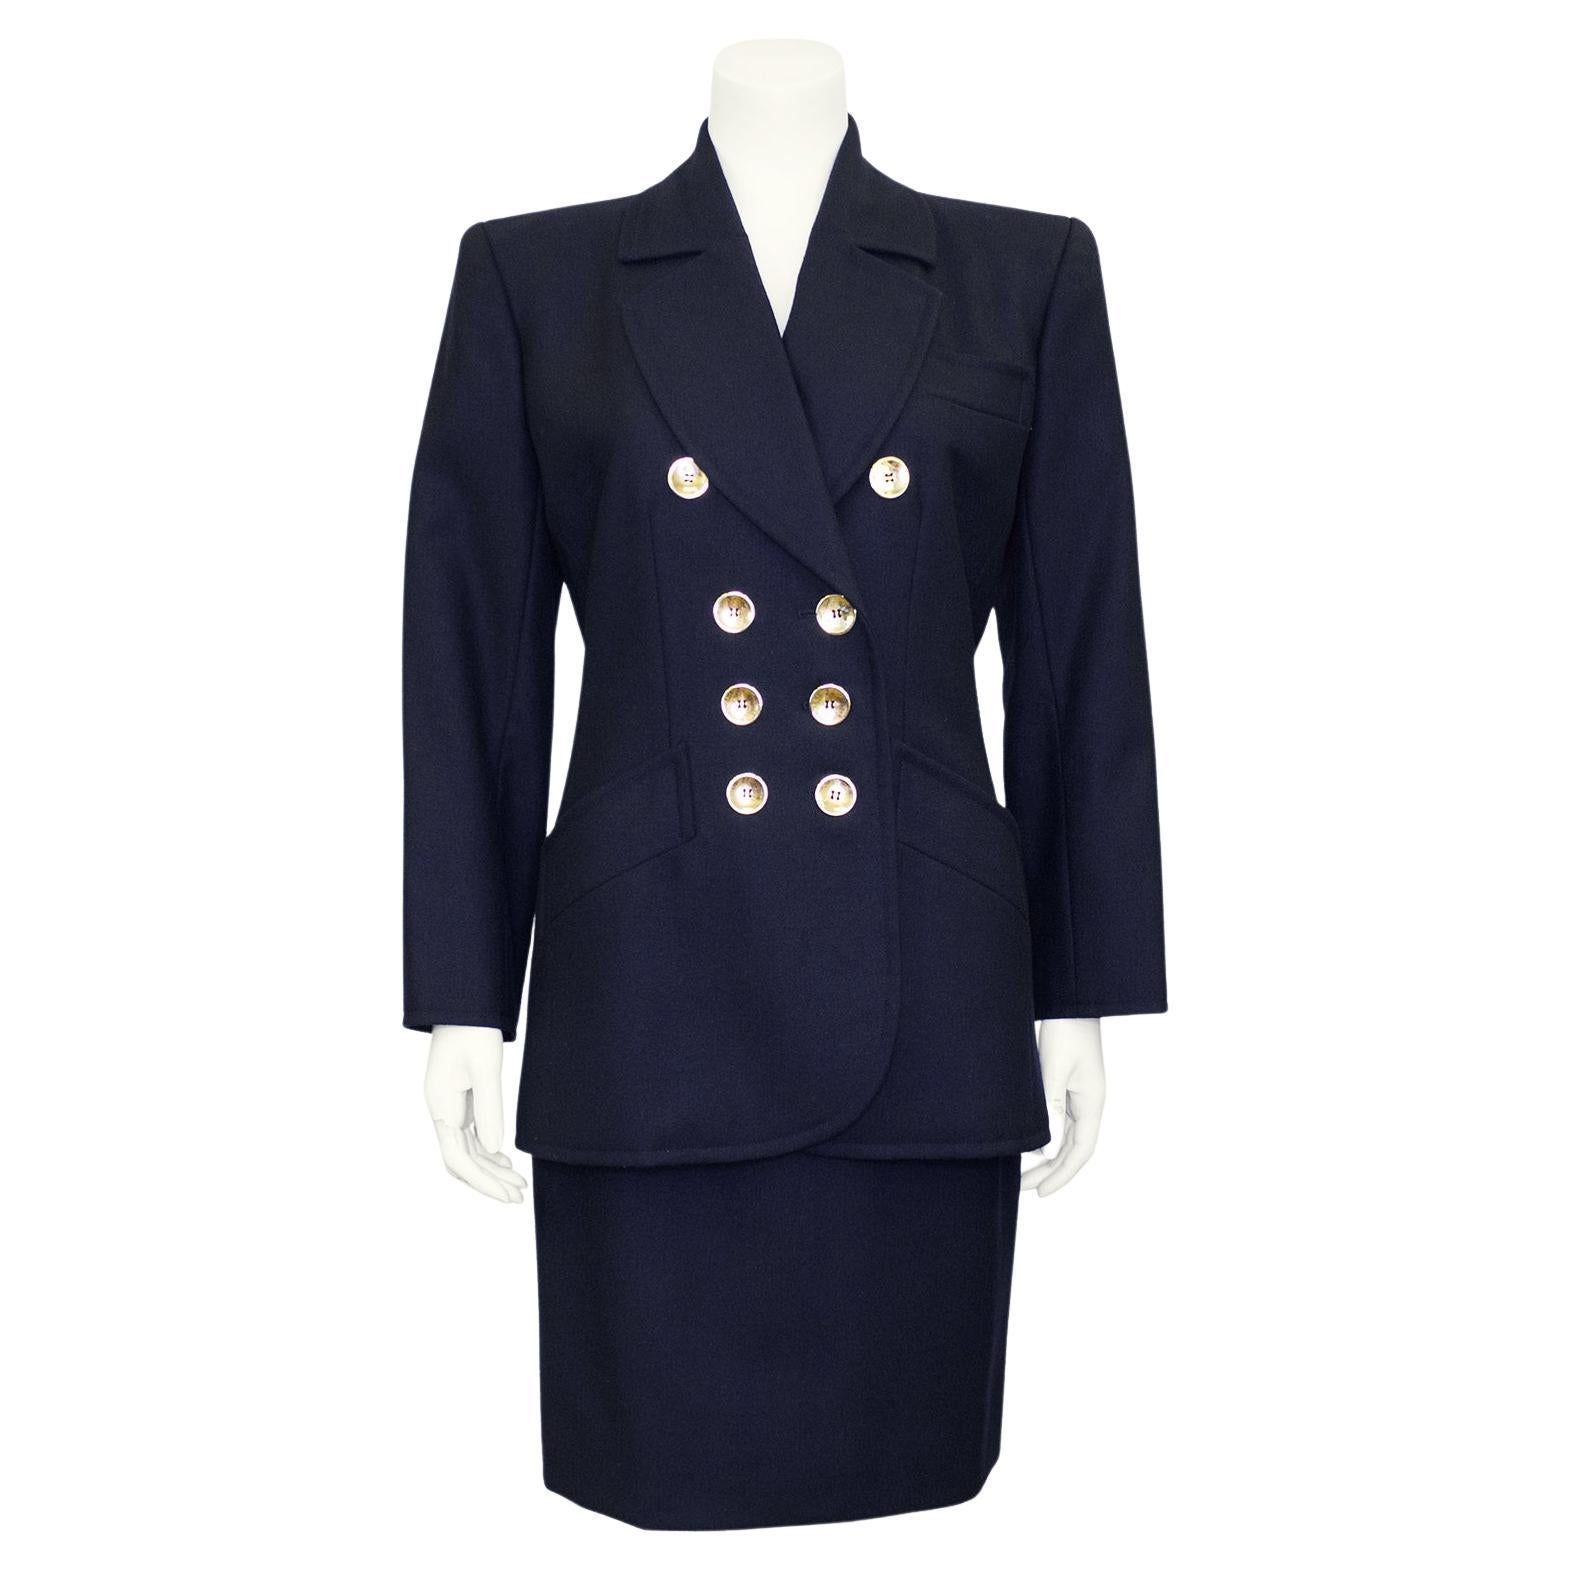 Early 1990s Saint Laurent Navy Wool Skirt Suit with Gold Buttons For Sale